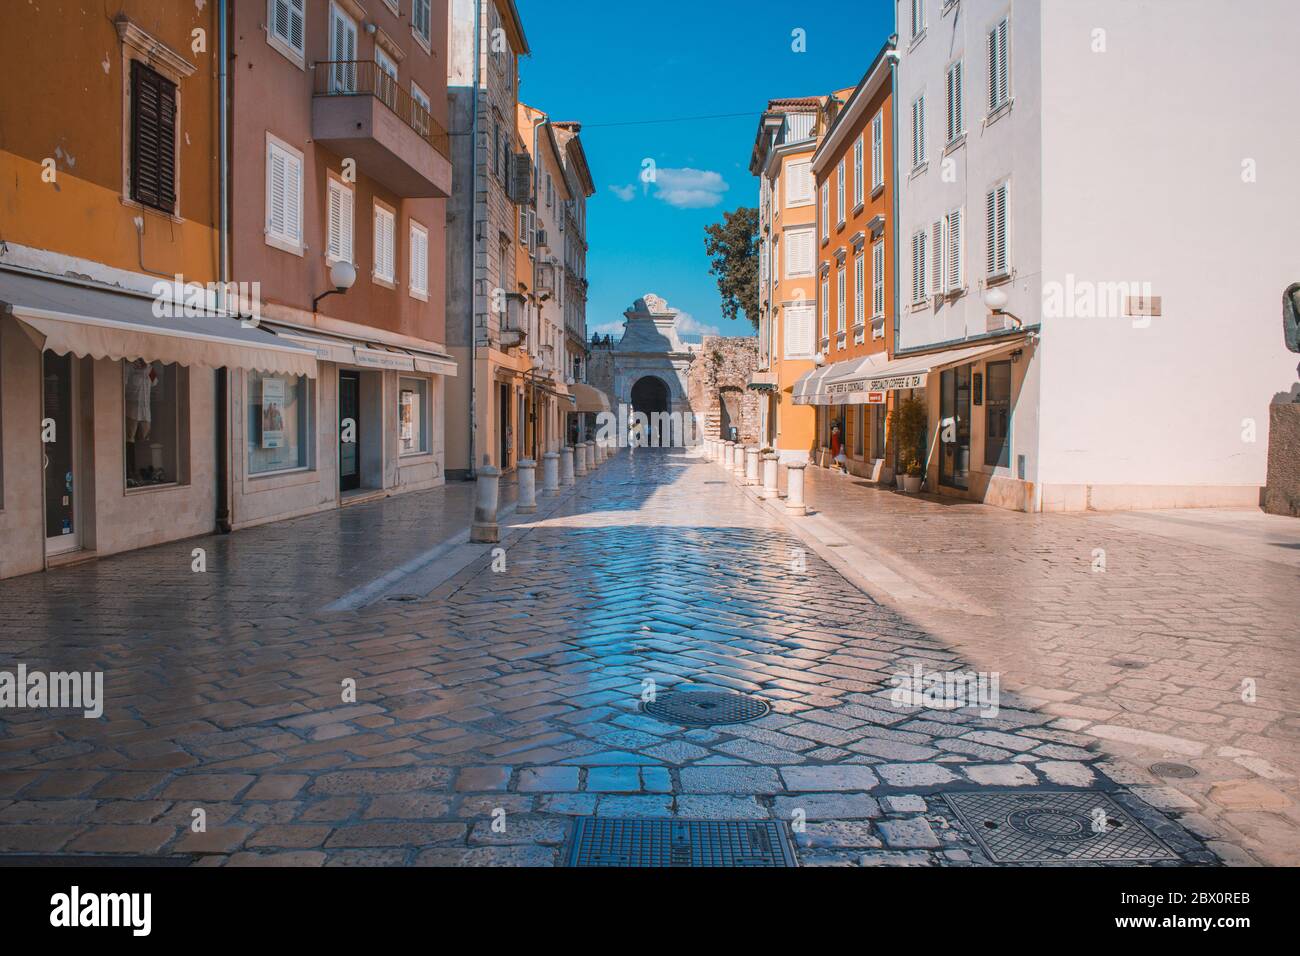 Zadar, Croatia - July 24 2018: Streets in the old town of Zadar. The famous  Sea Gate to the marina in the background Stock Photo - Alamy